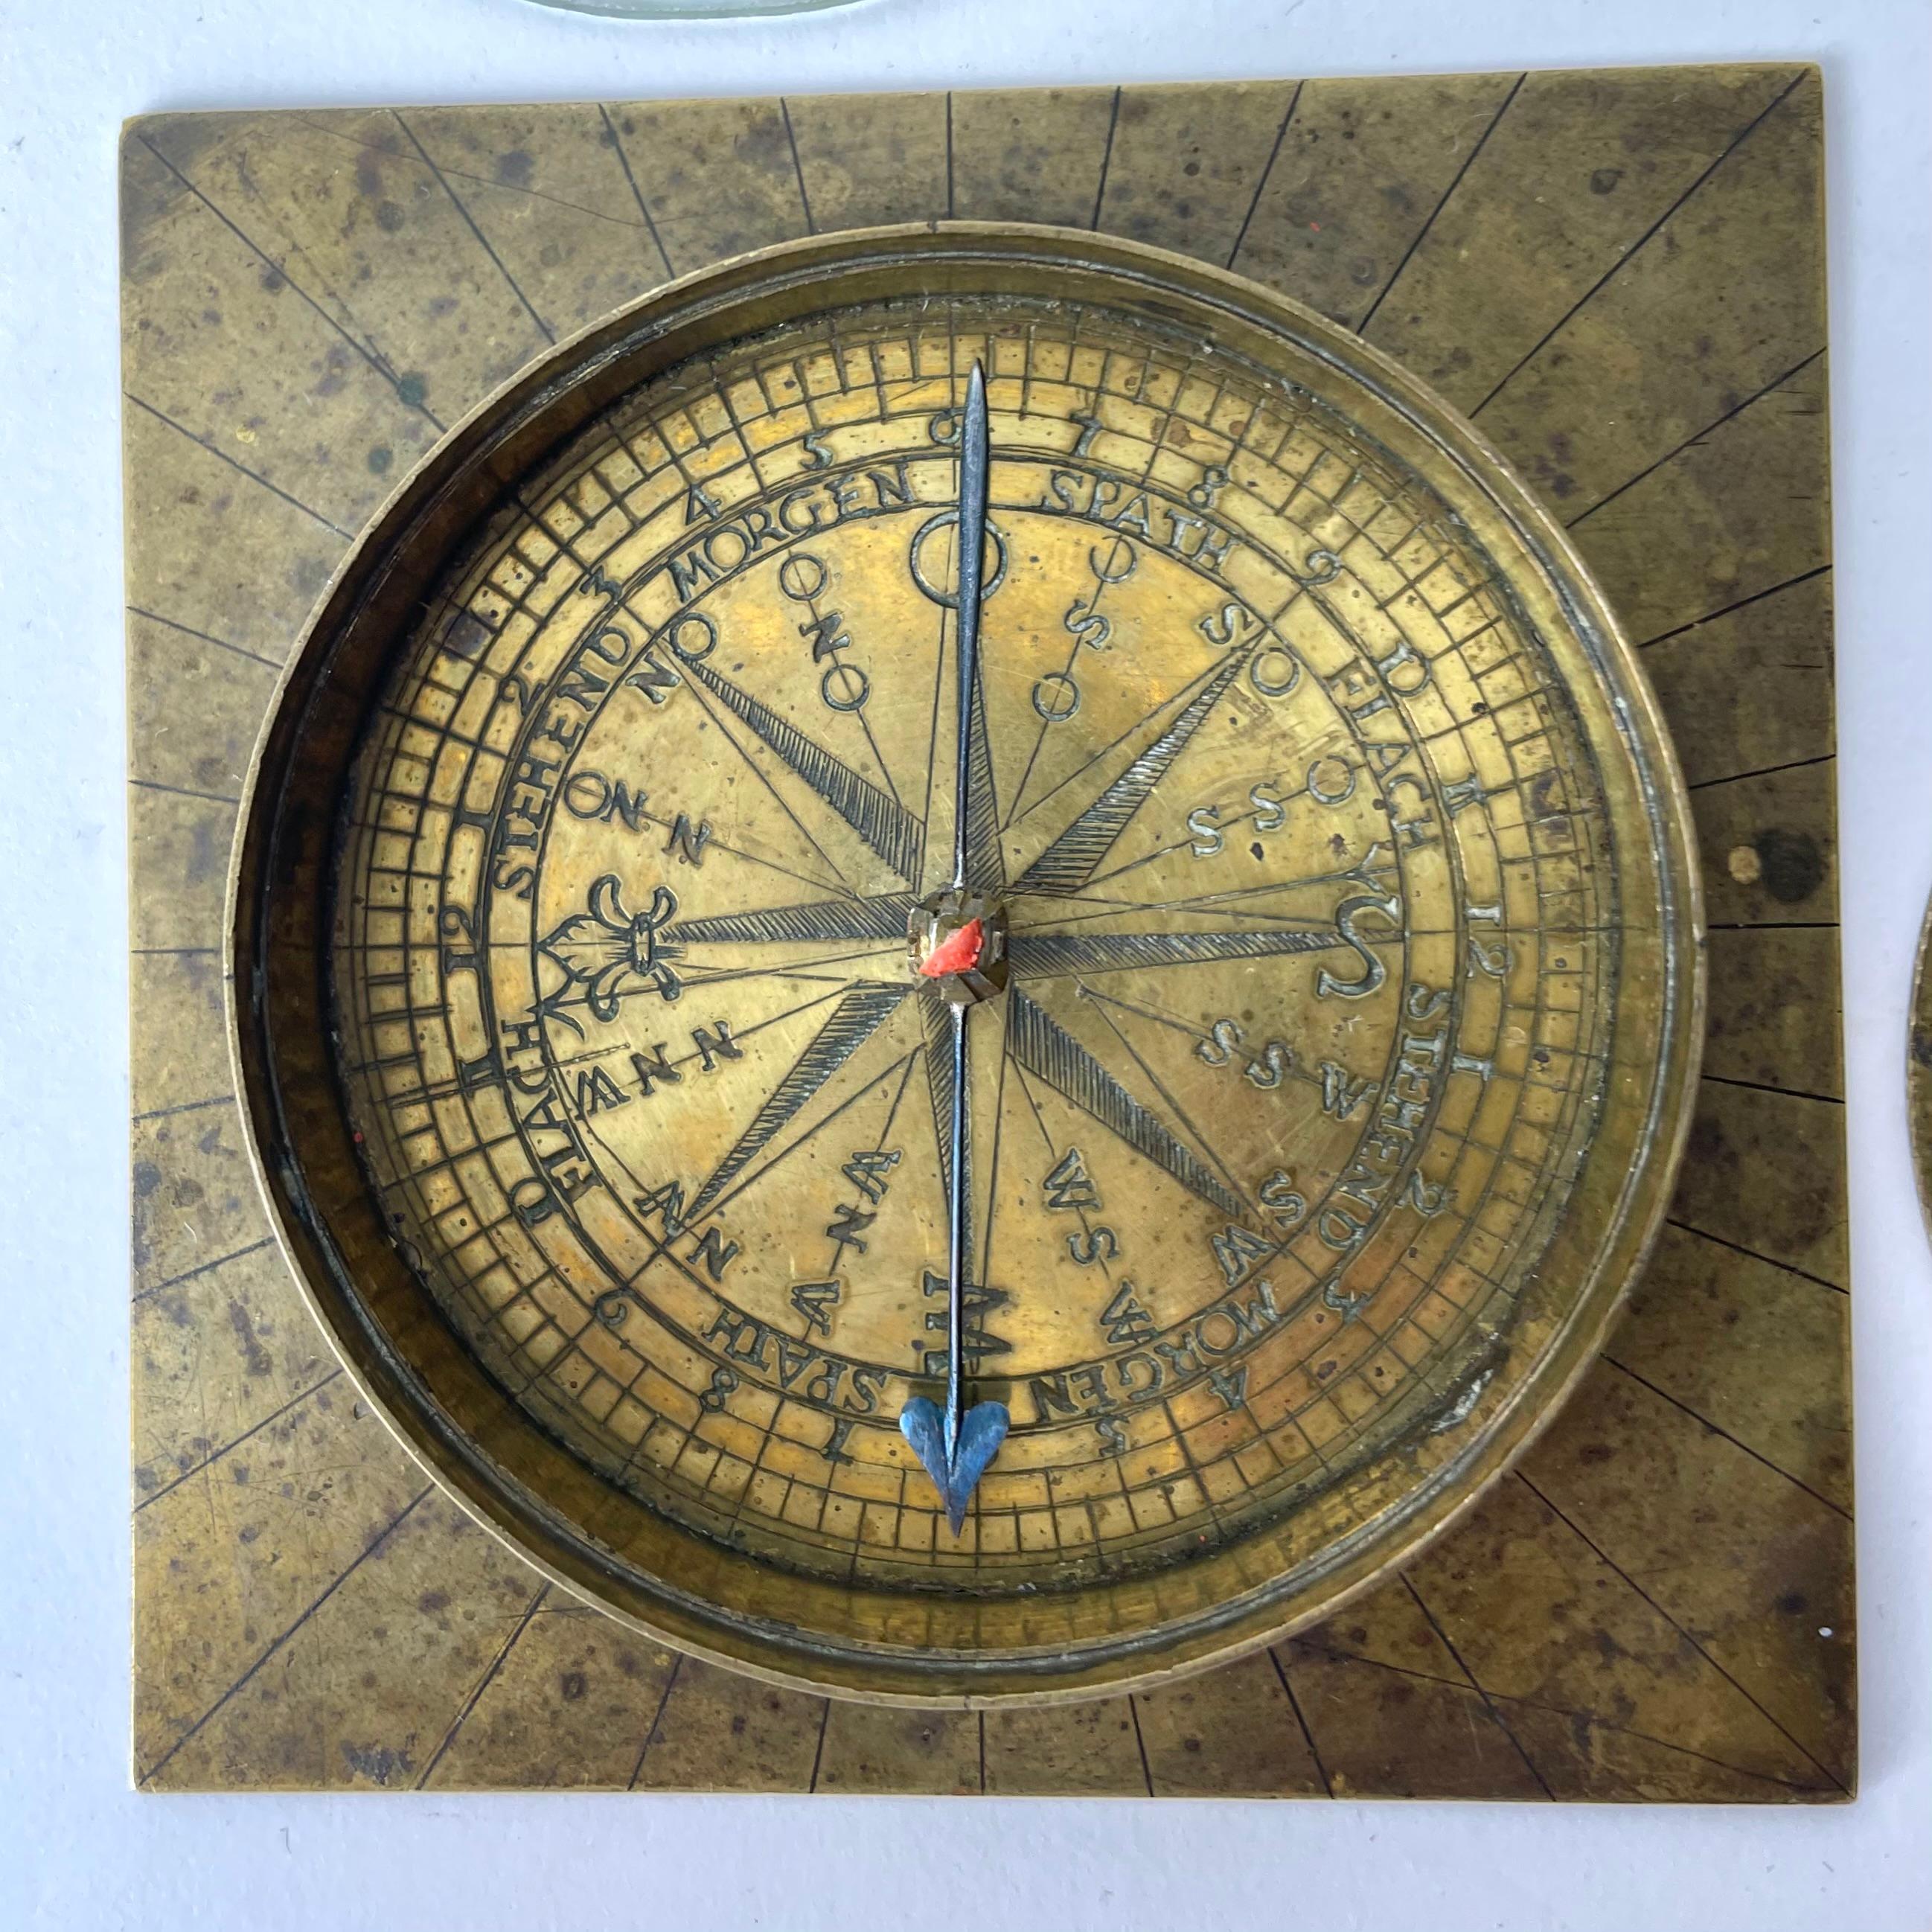 Splendid Gustavian Brass Compass with Sundial, Late 18th Century Sweden. By Swedish 18th century clockmaker Johan Elfgren (1720-1801) from Gagnef in the Swedish county of Dalecarlia (Dalarna)

The compass is mounted upon a thin rectangular brass